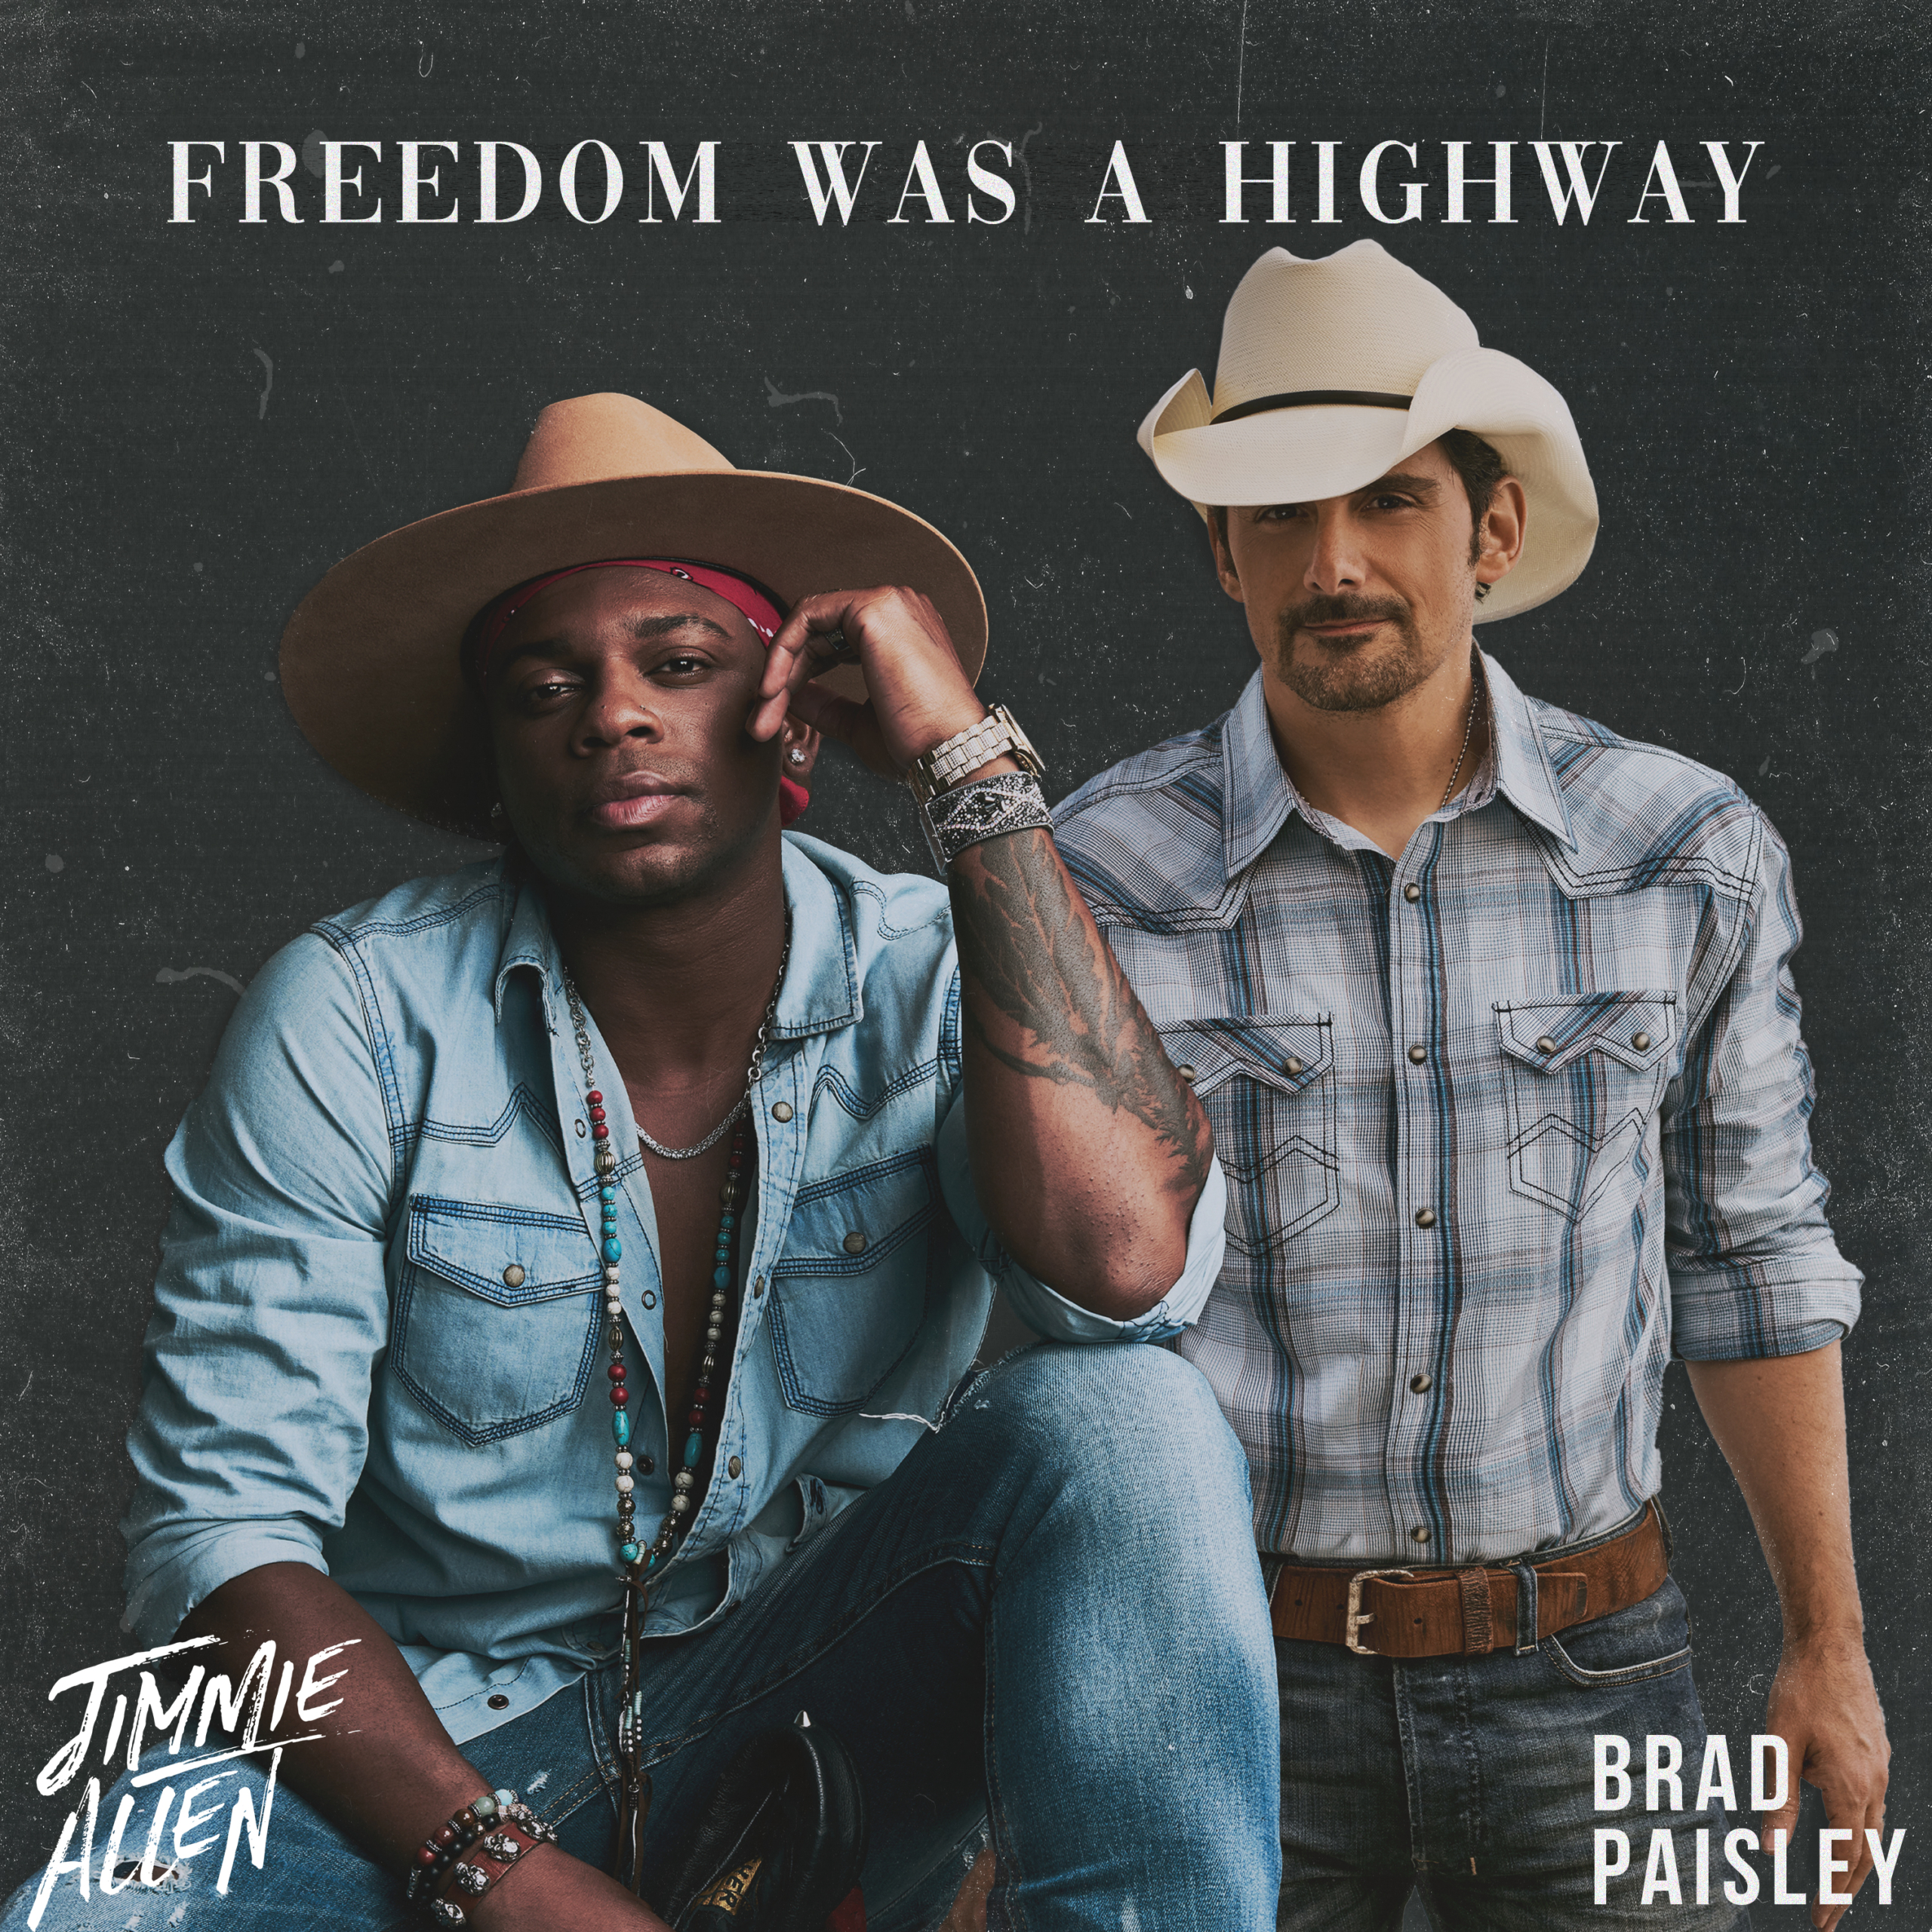 Jimmie Allen and Brad Paisley's "Freedom Was A Highway" Impacts Country Radio February 1st